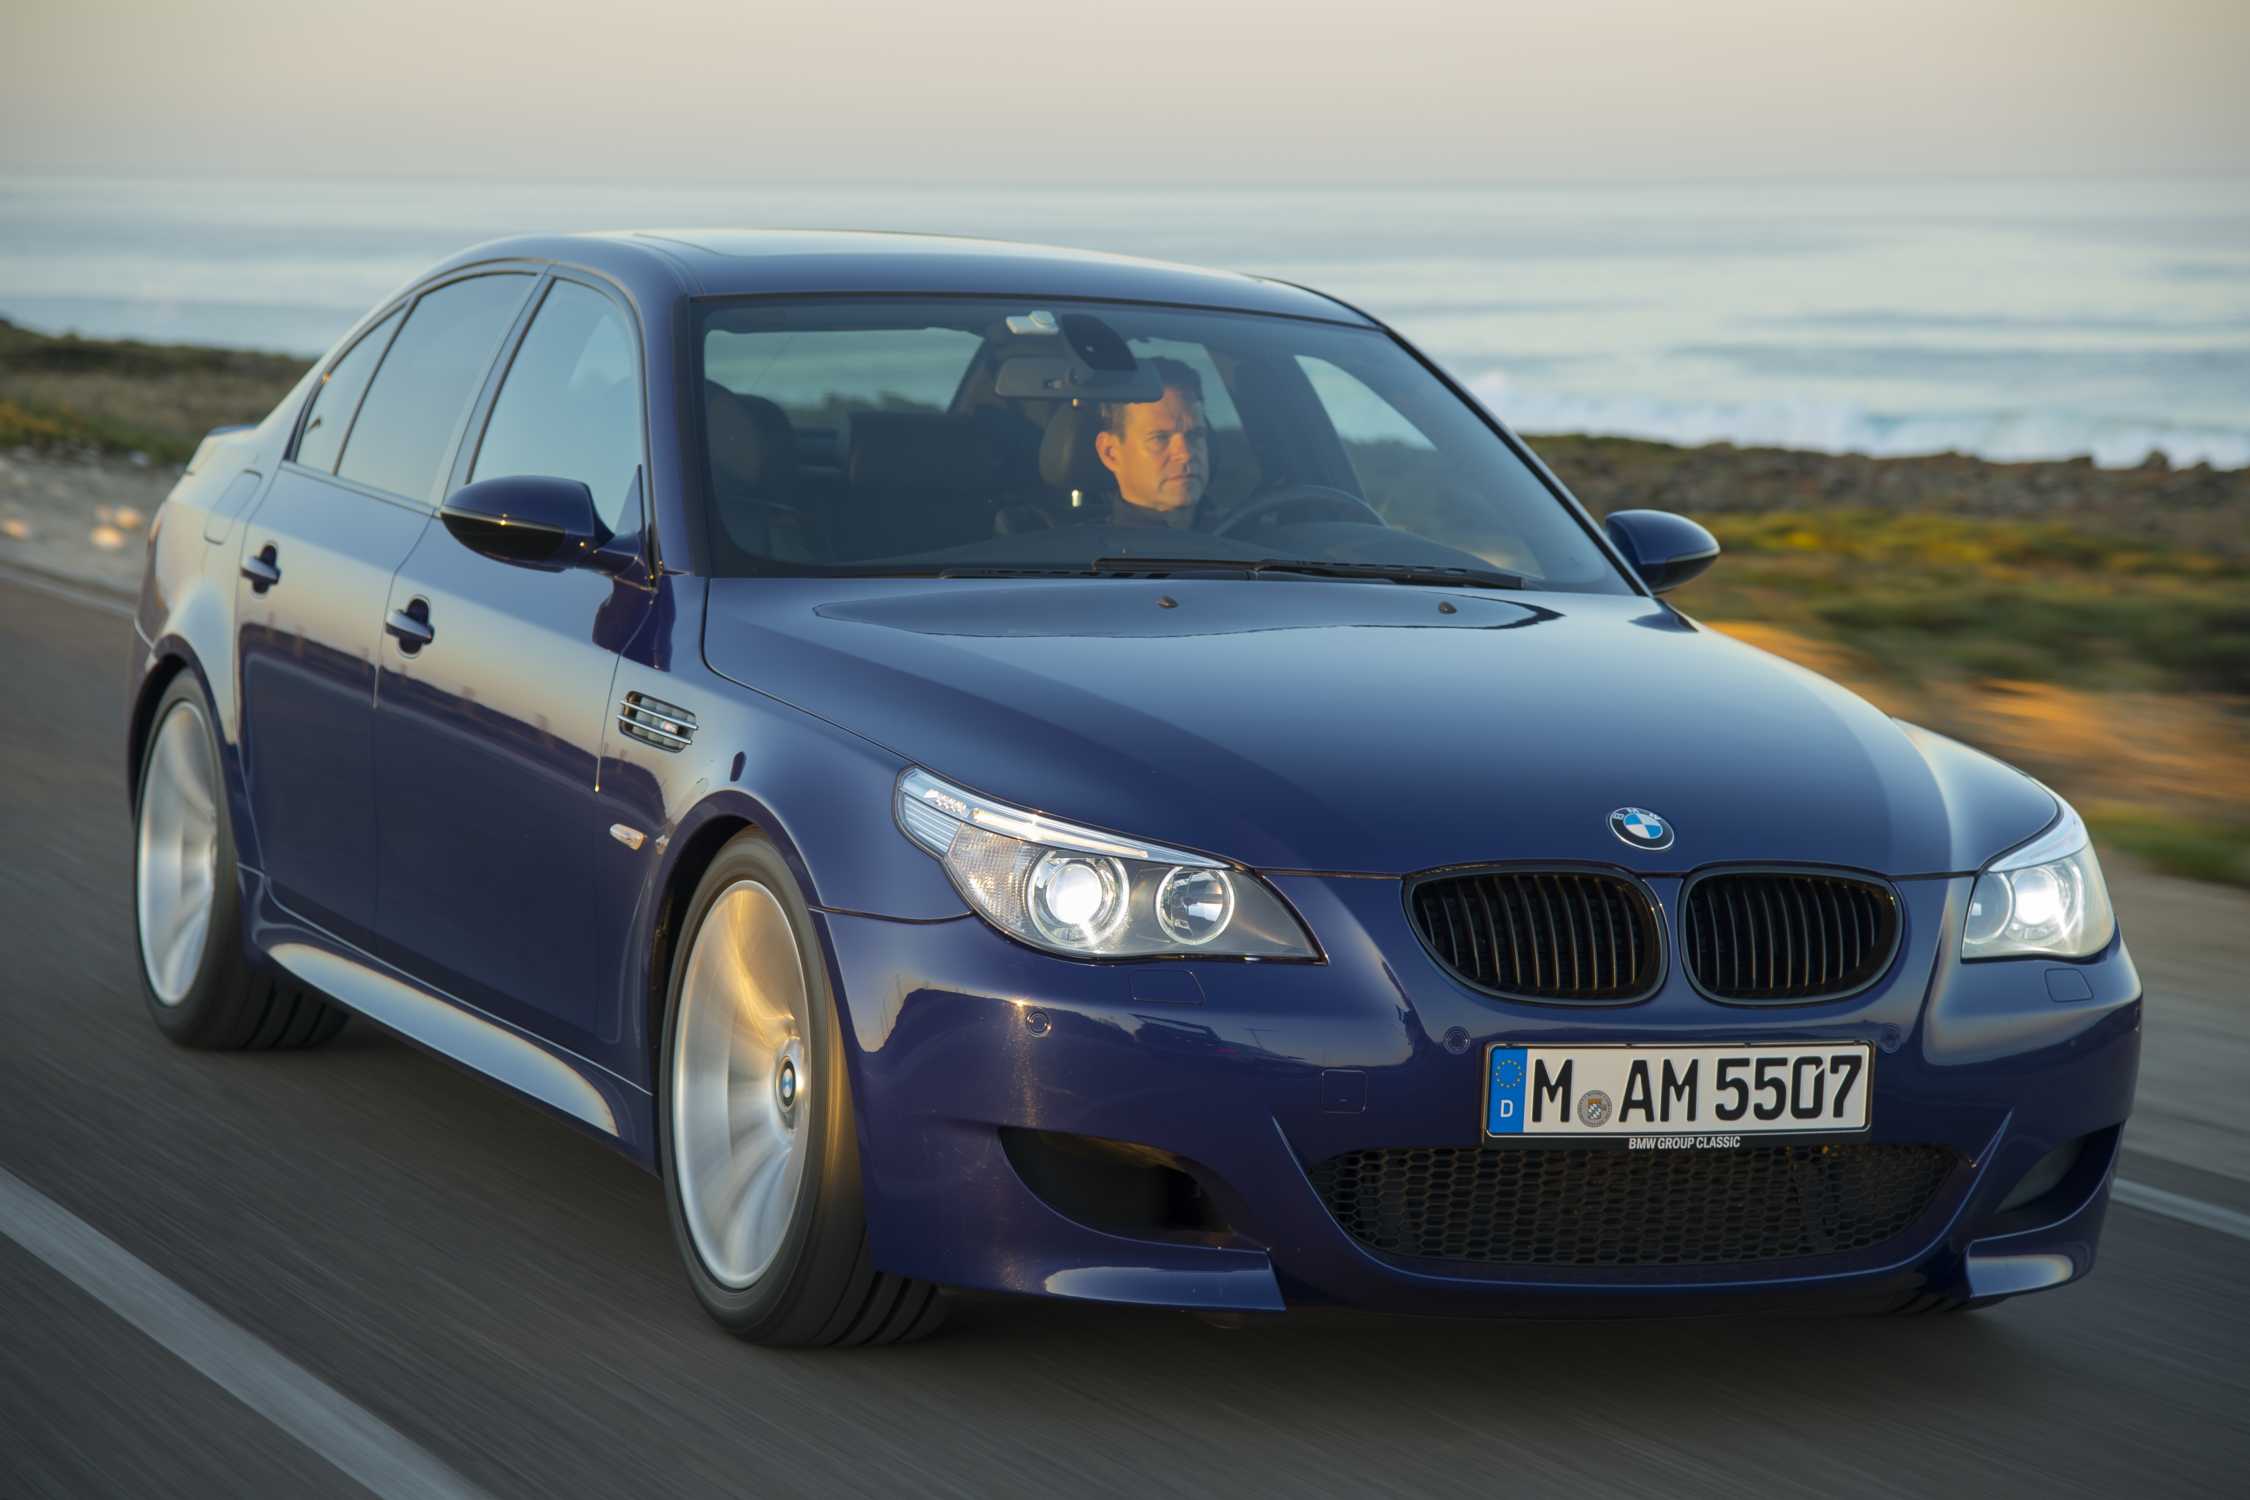 The BMW M5 (Period of production: 07/2003–05/2010) (11/2017).